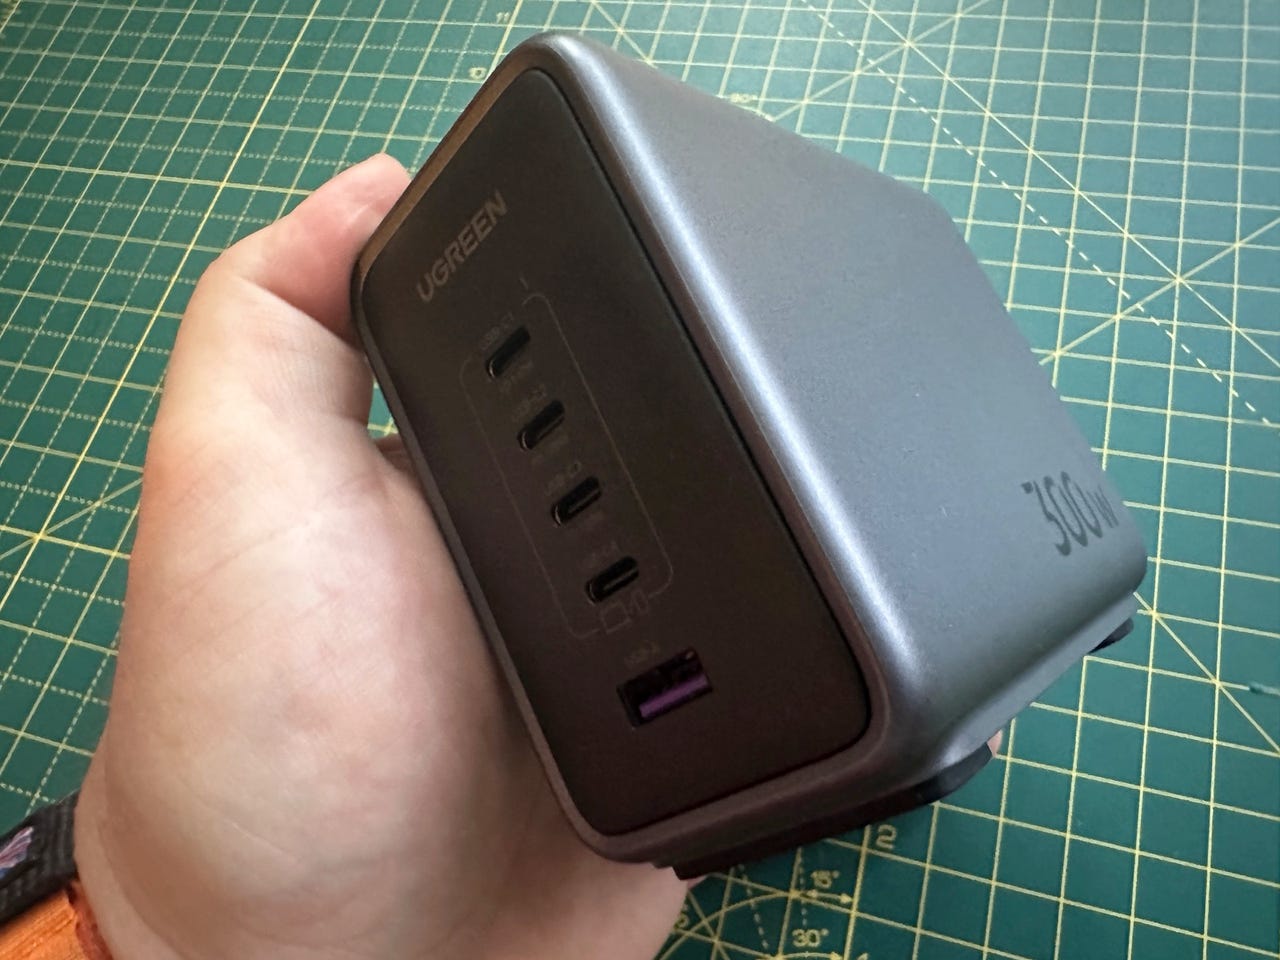 This New Lineup From UGreen Has Some Amazing Chargers! 